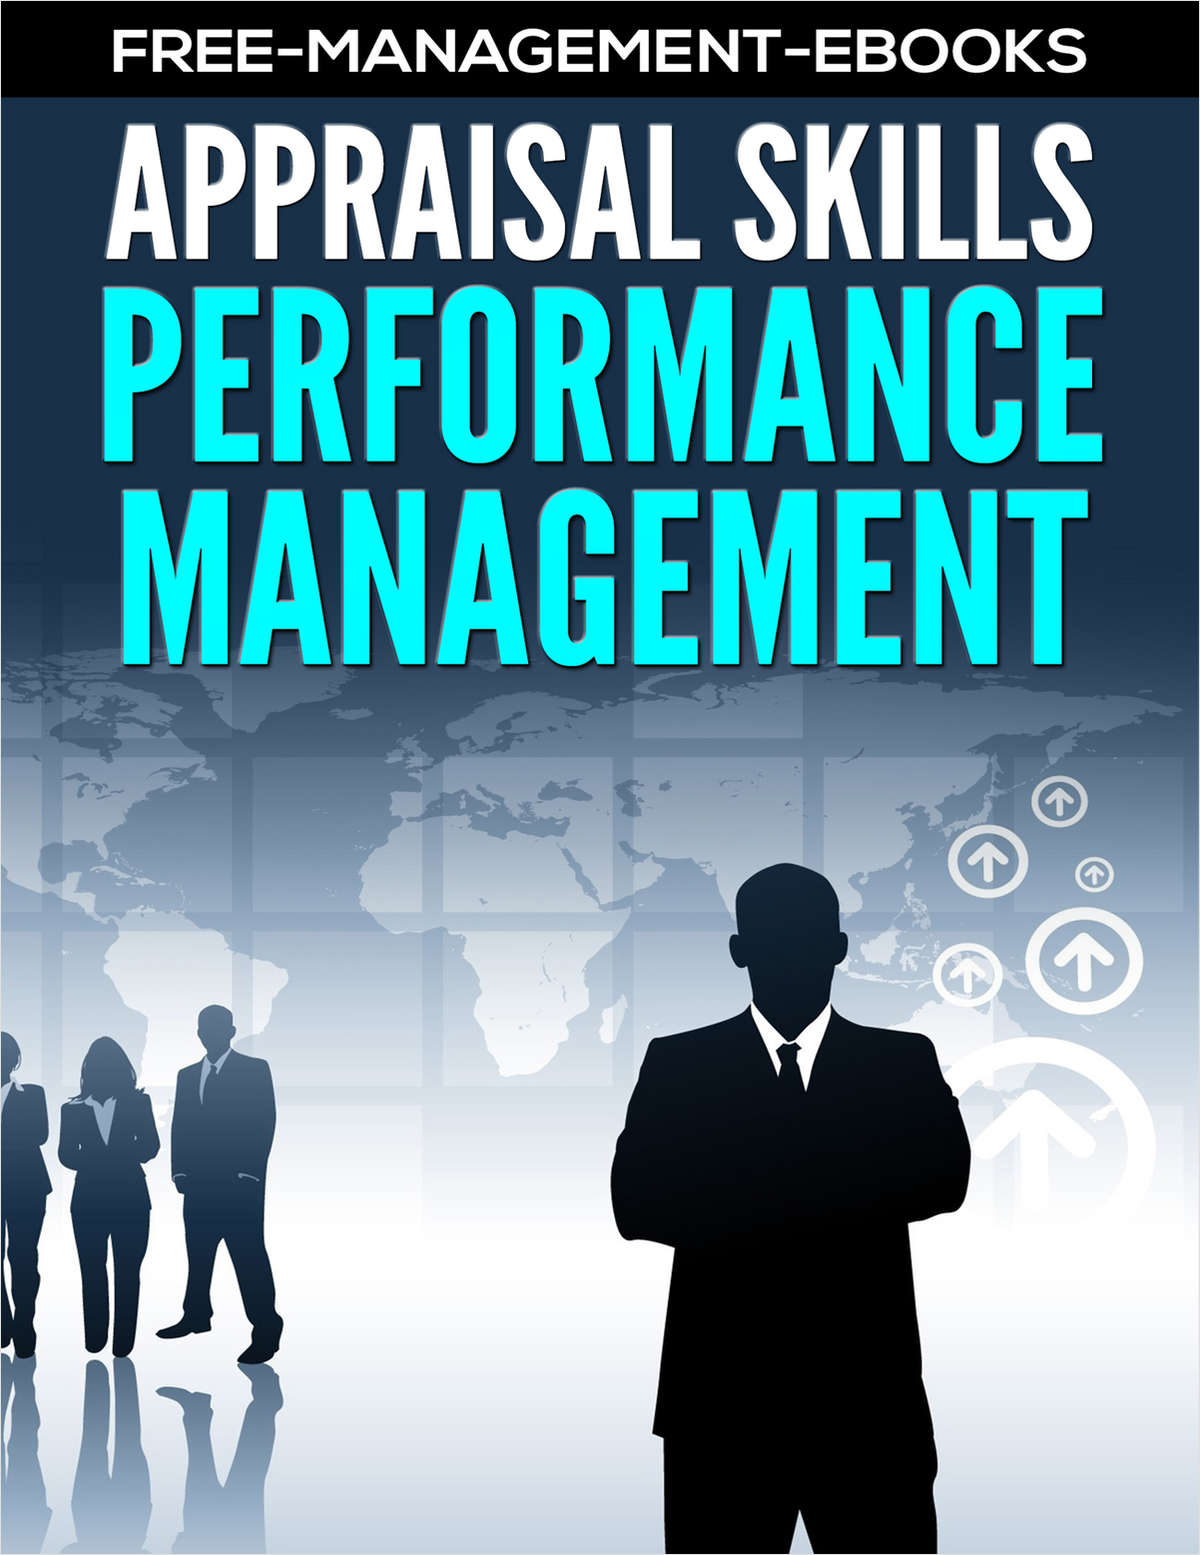 Performance Management - Developing Your Appraisal Skills